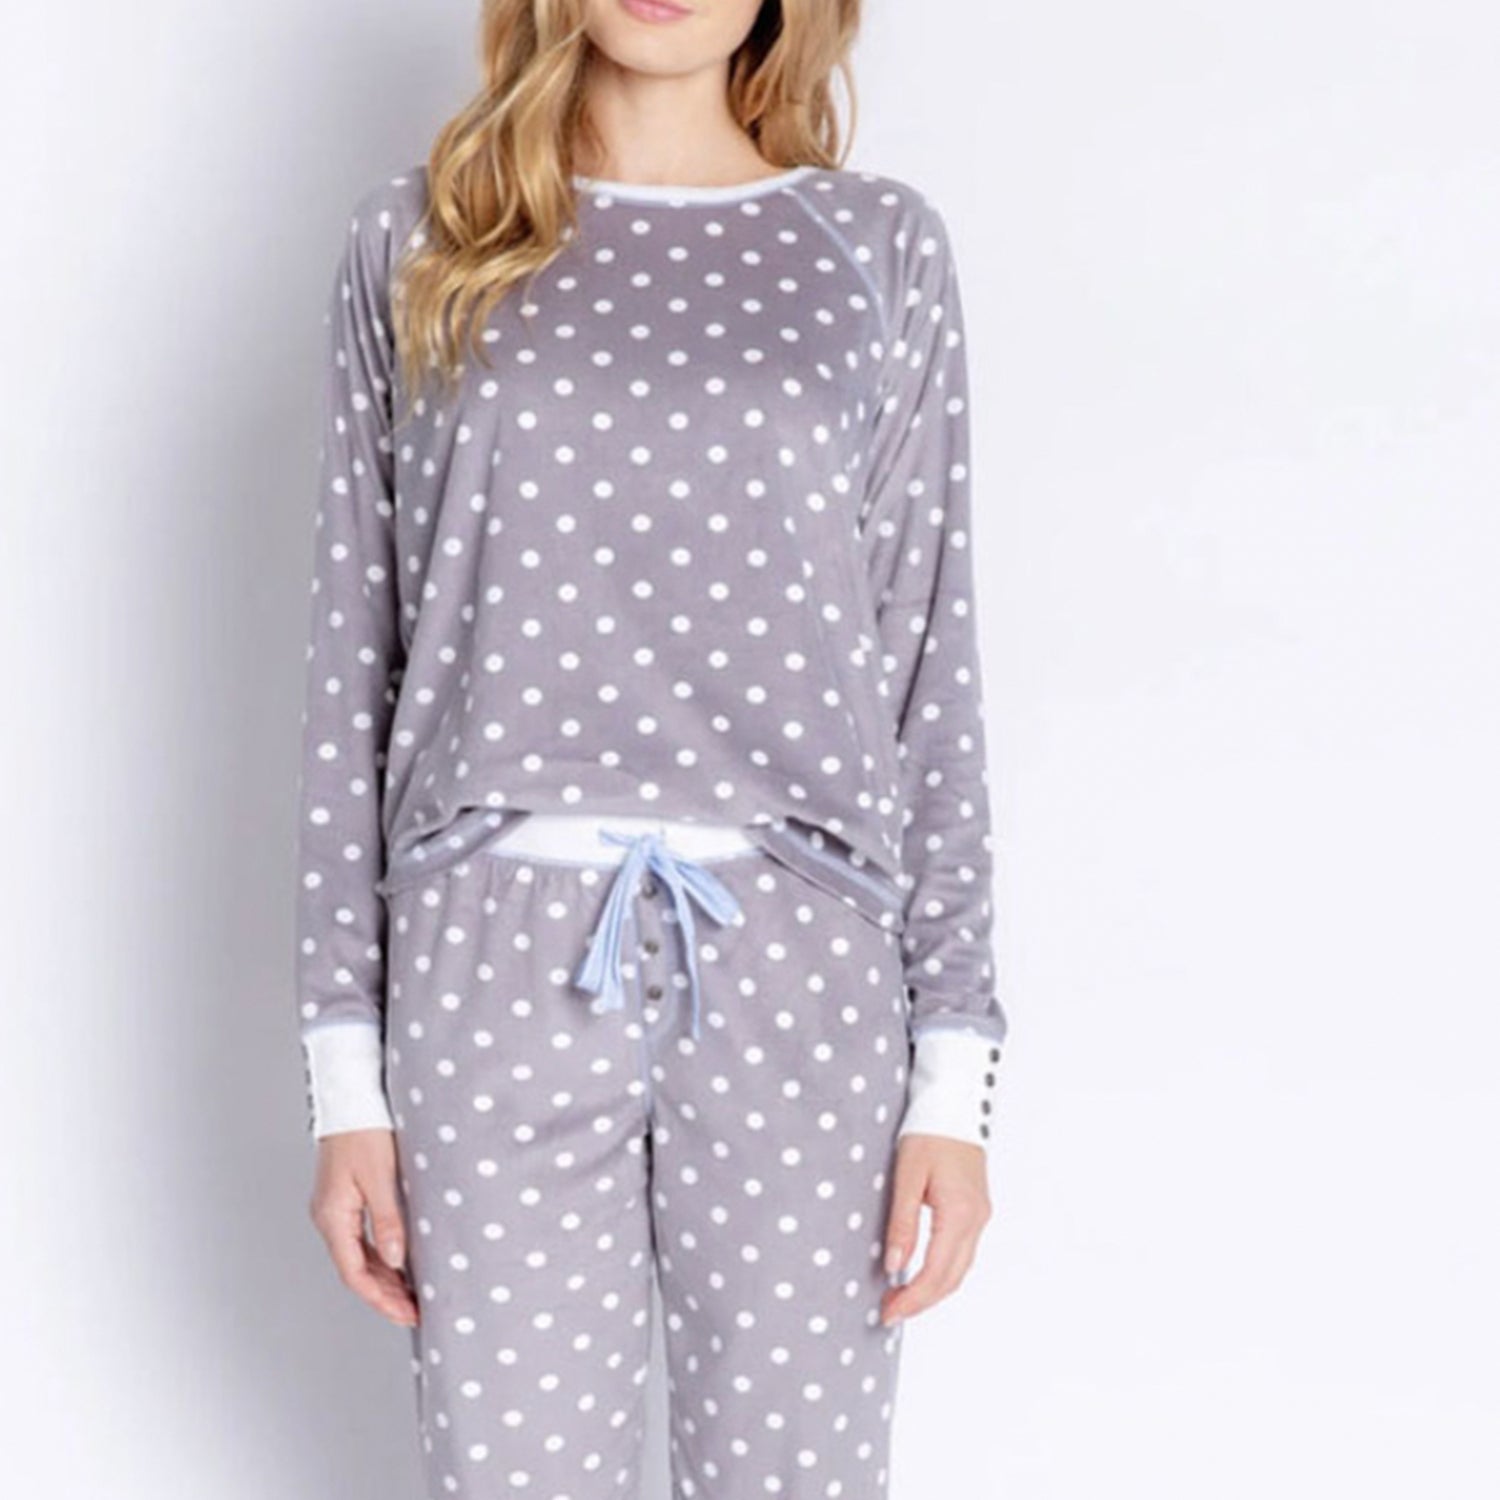 PJ Salvage Winter Woods Top. Be cozy and cute in this super soft polka dot pajama top! Grab the matching bottoms to make it a matching set